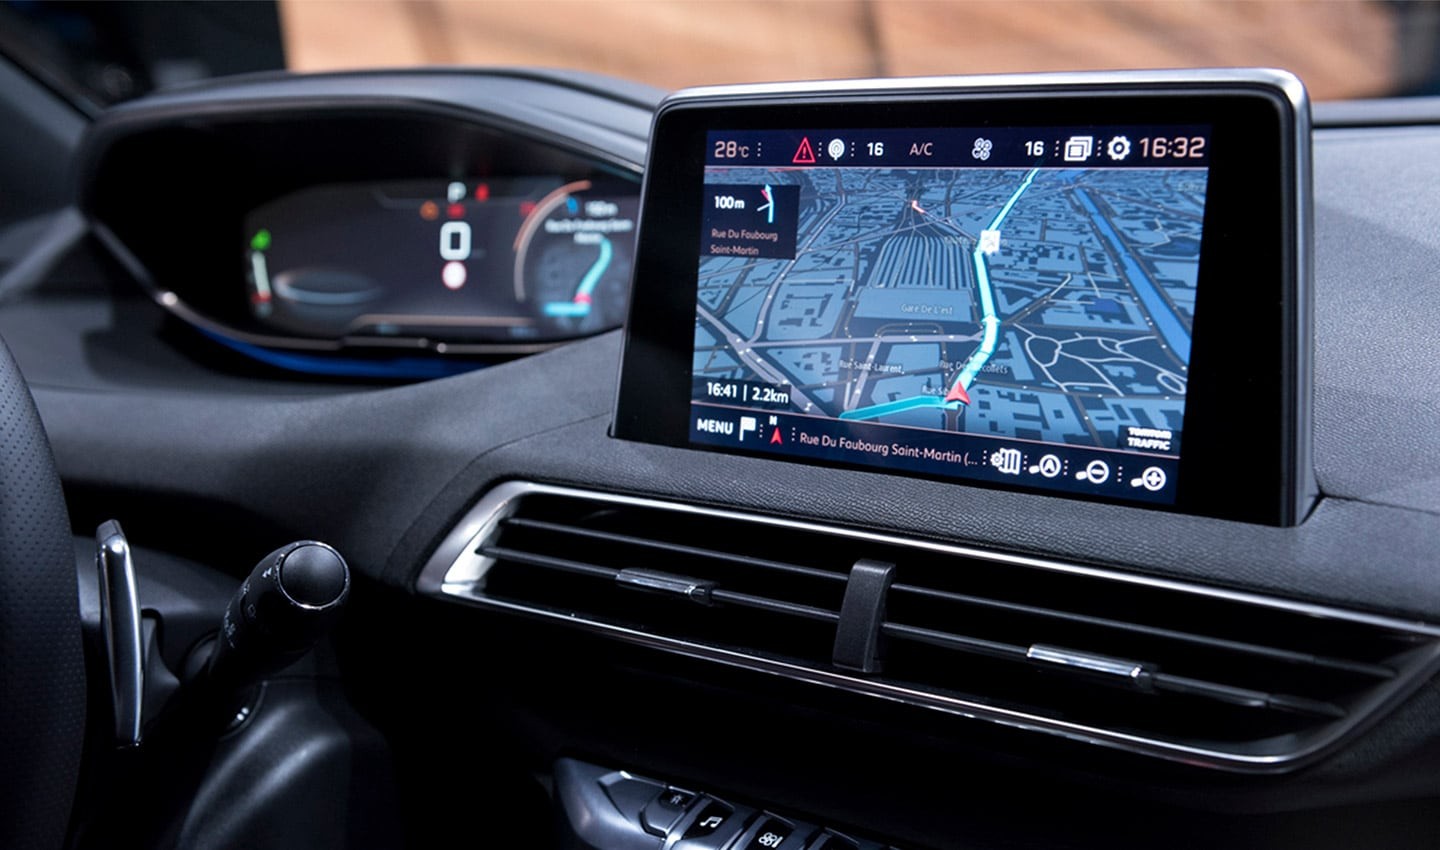  In this day and age, embedded navigation systems are a must-have for many.